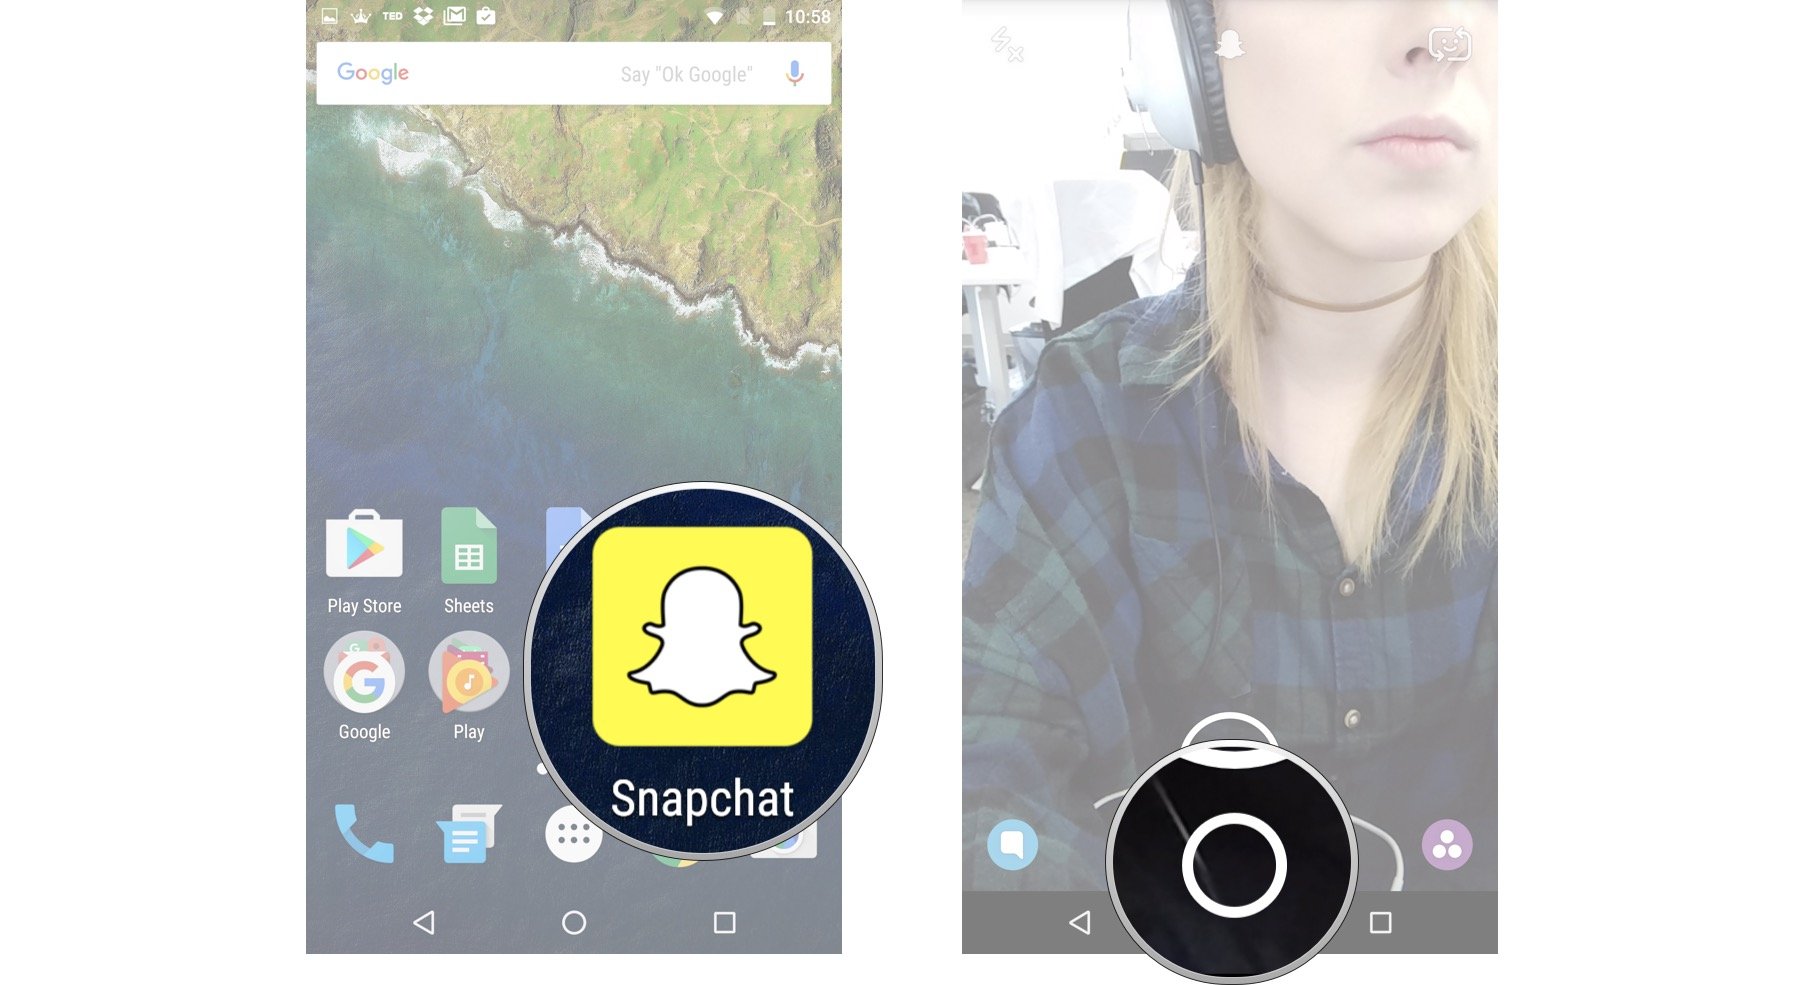 Launch Snapchat from your home screen and tap on the smaller white circle underneath the shutter button to access Memories.